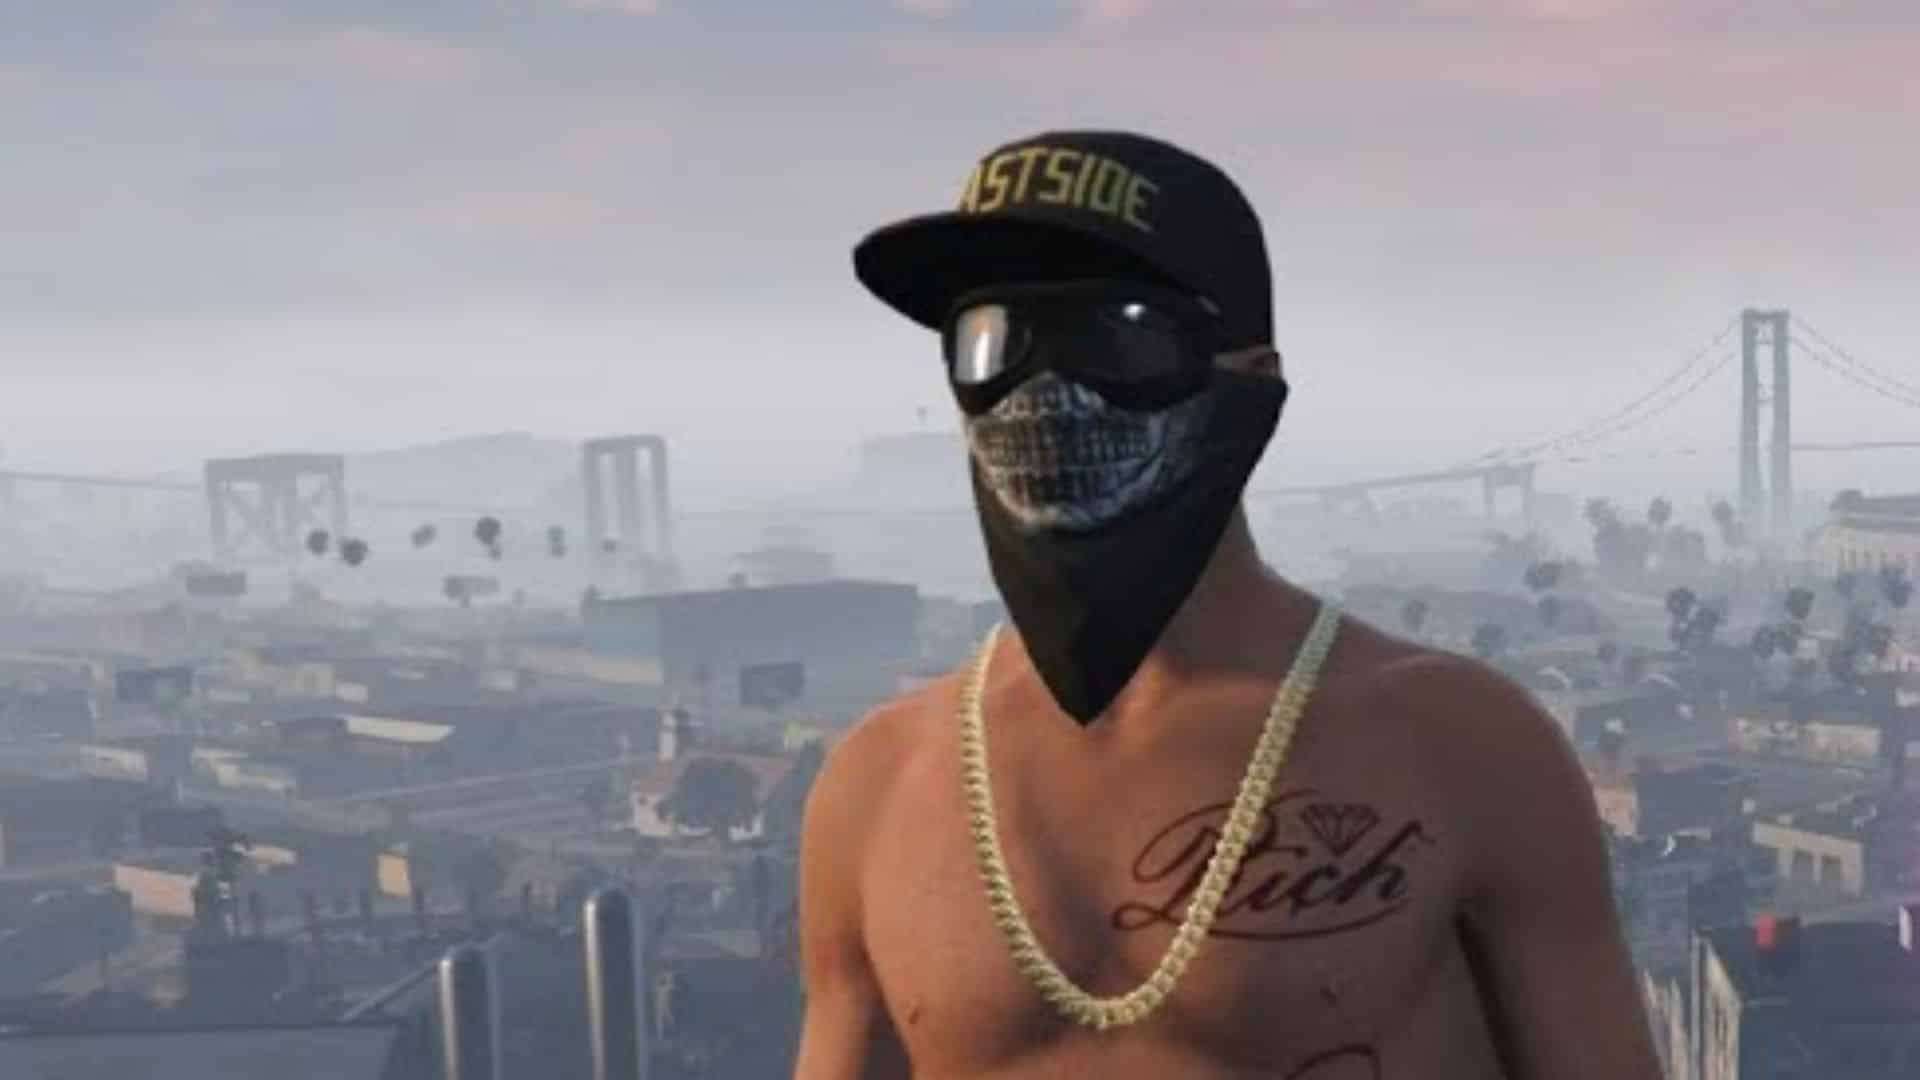 GTA RP character taking selfie from high height